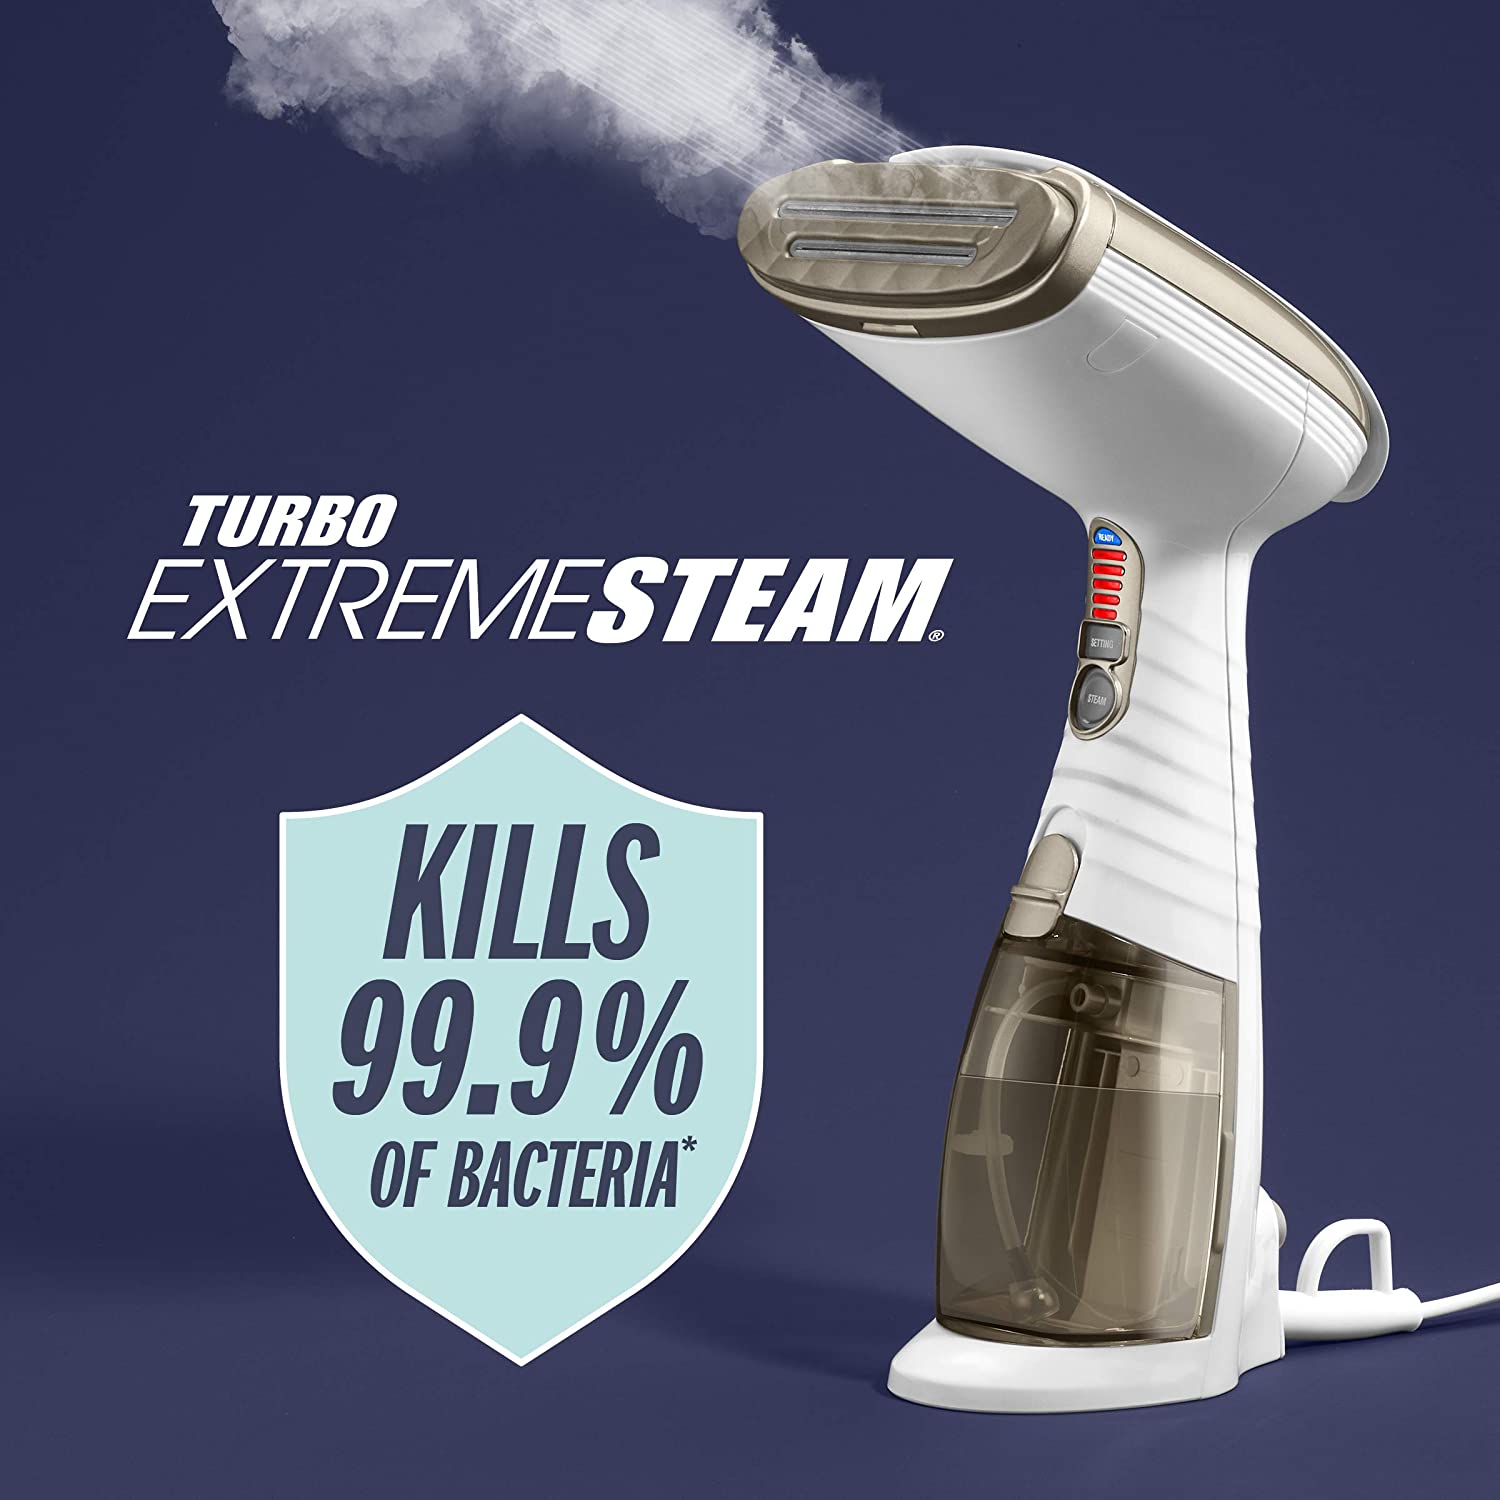 Conair Turbo Extreme Steam Hand Held Fabric Steamer, White/Champagne GS59 - image 3 of 12